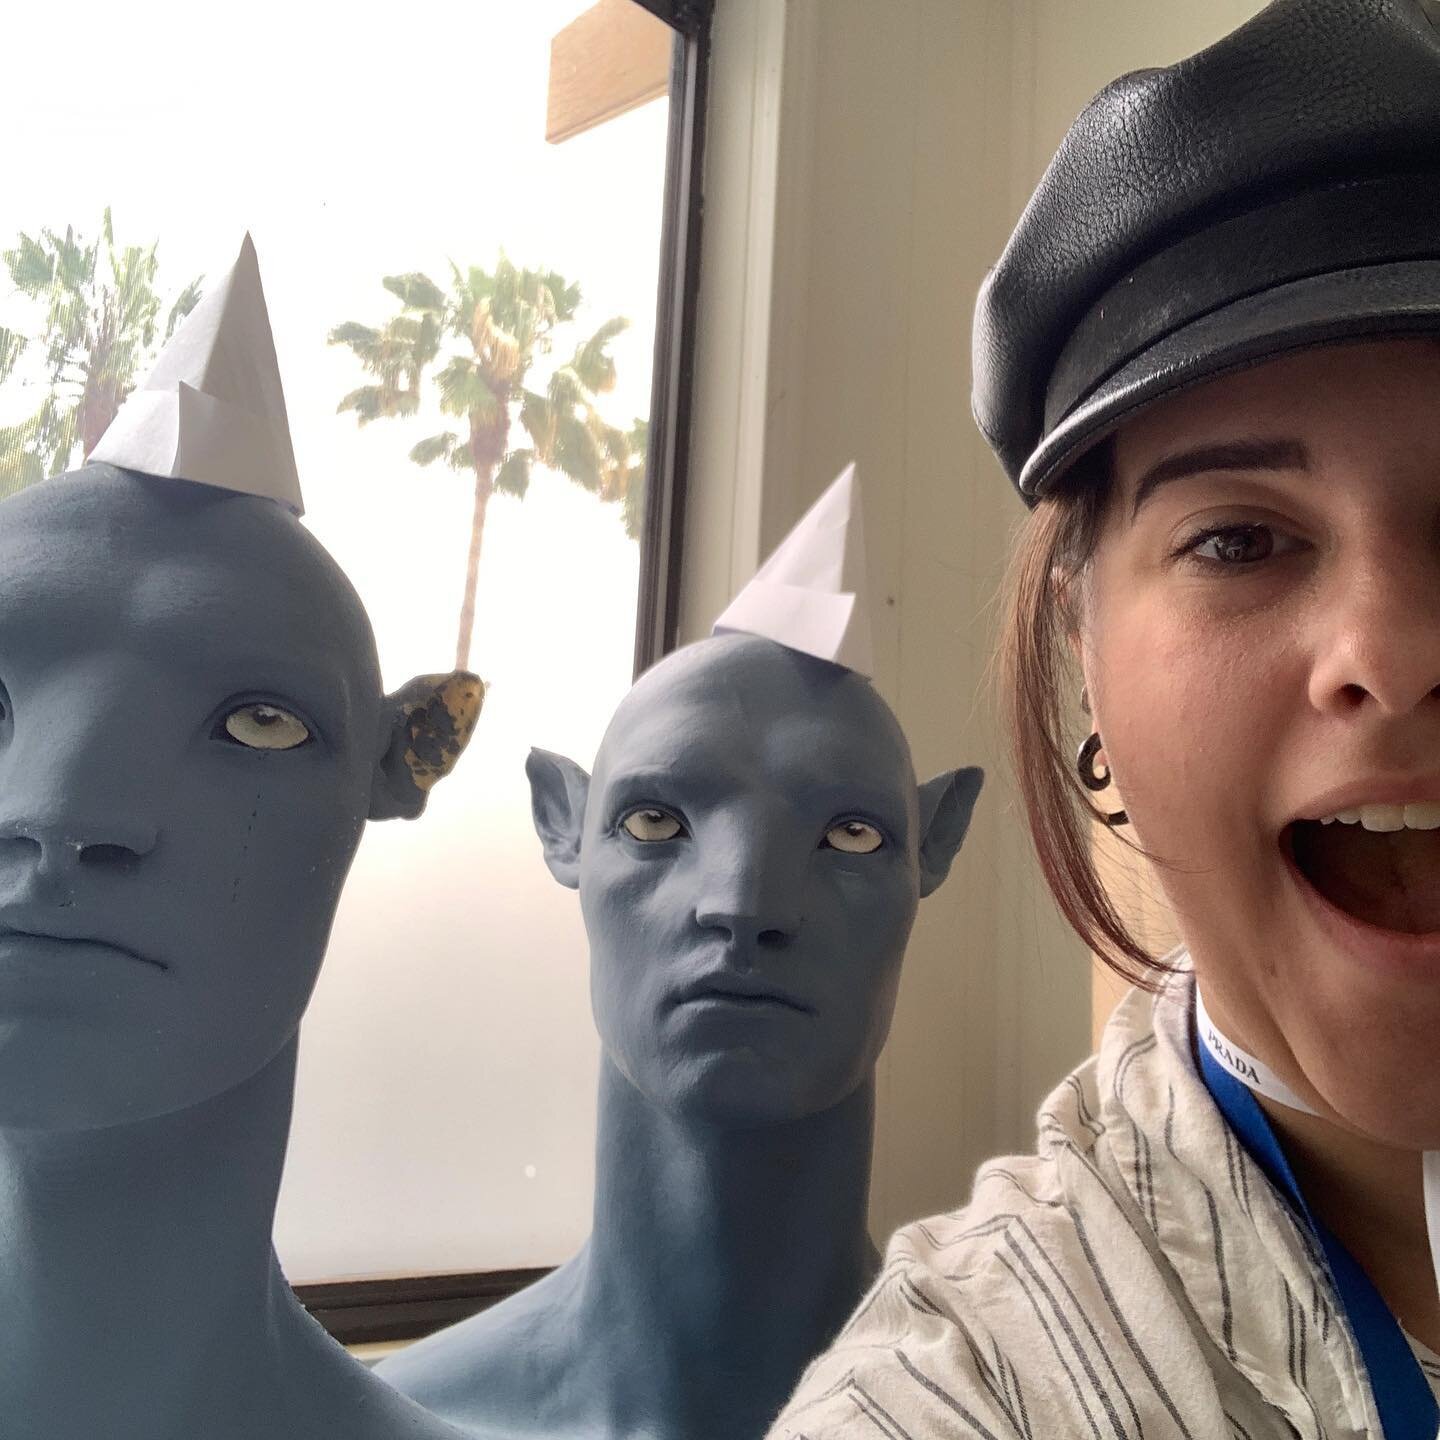 I take my job very seriously. I keep the Na&rsquo;vi clothed AND ACCESSORIZED at all times! .
.
.
.
#costumedept #costumes #costumepa #losangeles #lalife #lovemyjob #costumerlife #makingmovies #filmmaking